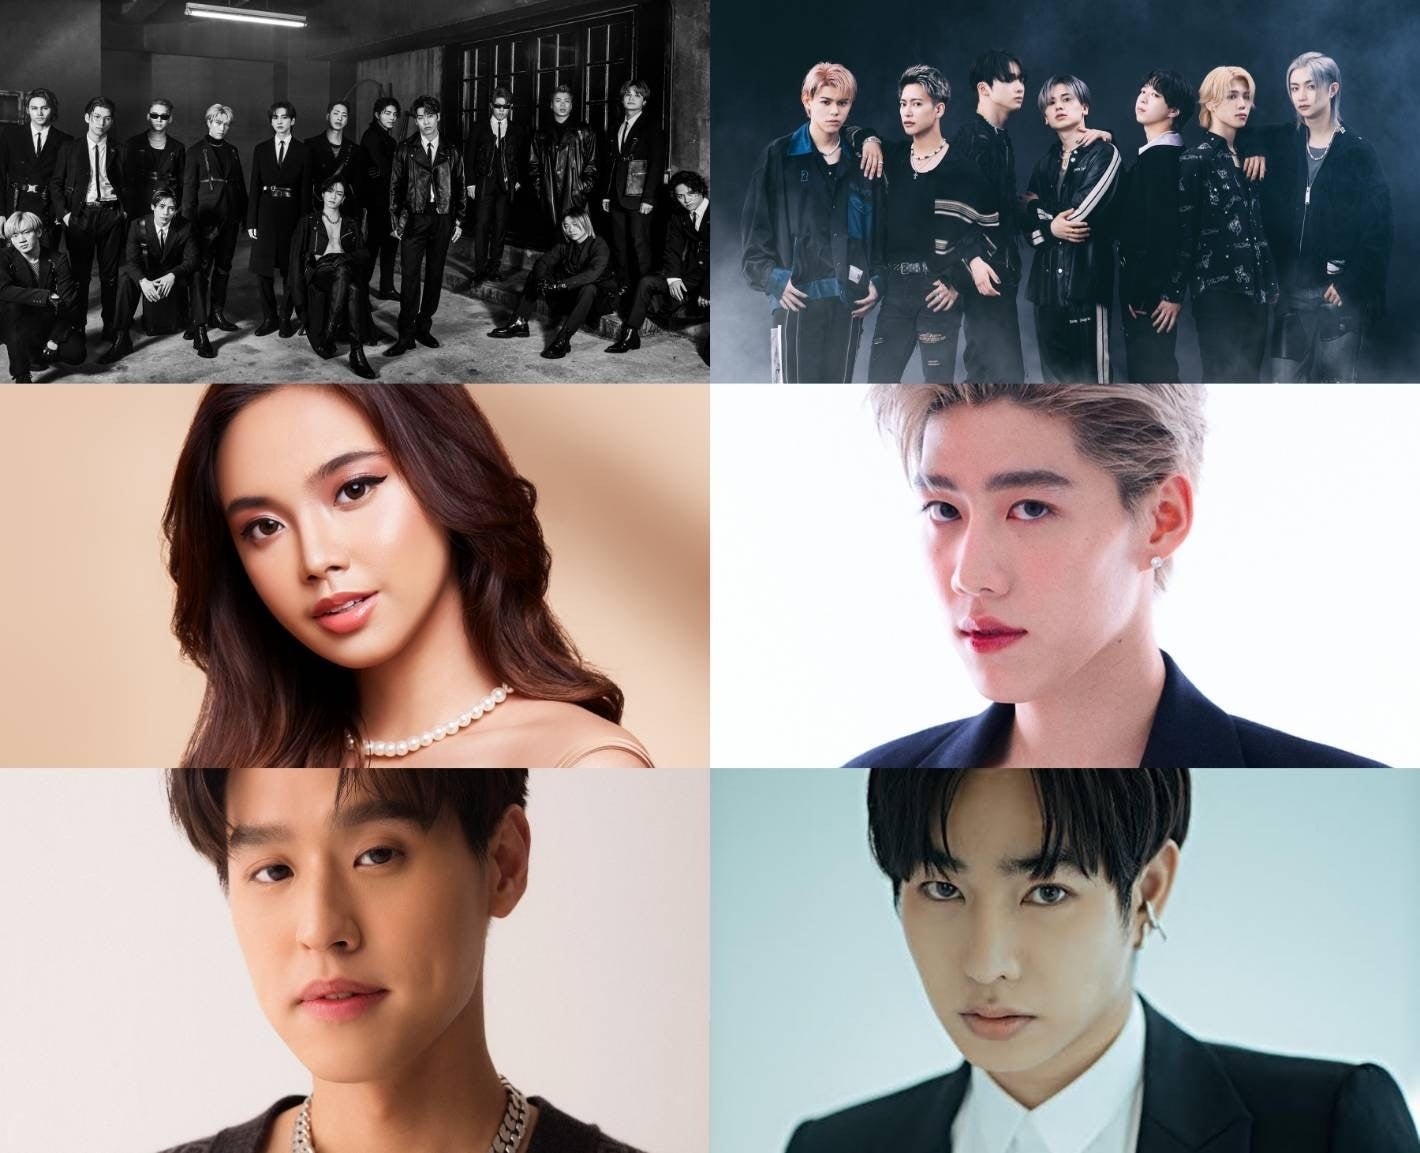 「2022 Asia Artist Awards in Japan」出演アーティスト発表【第７弾】THE RAMPAGE from EXILE TRIBE 、BE:FIRST 出演決定！